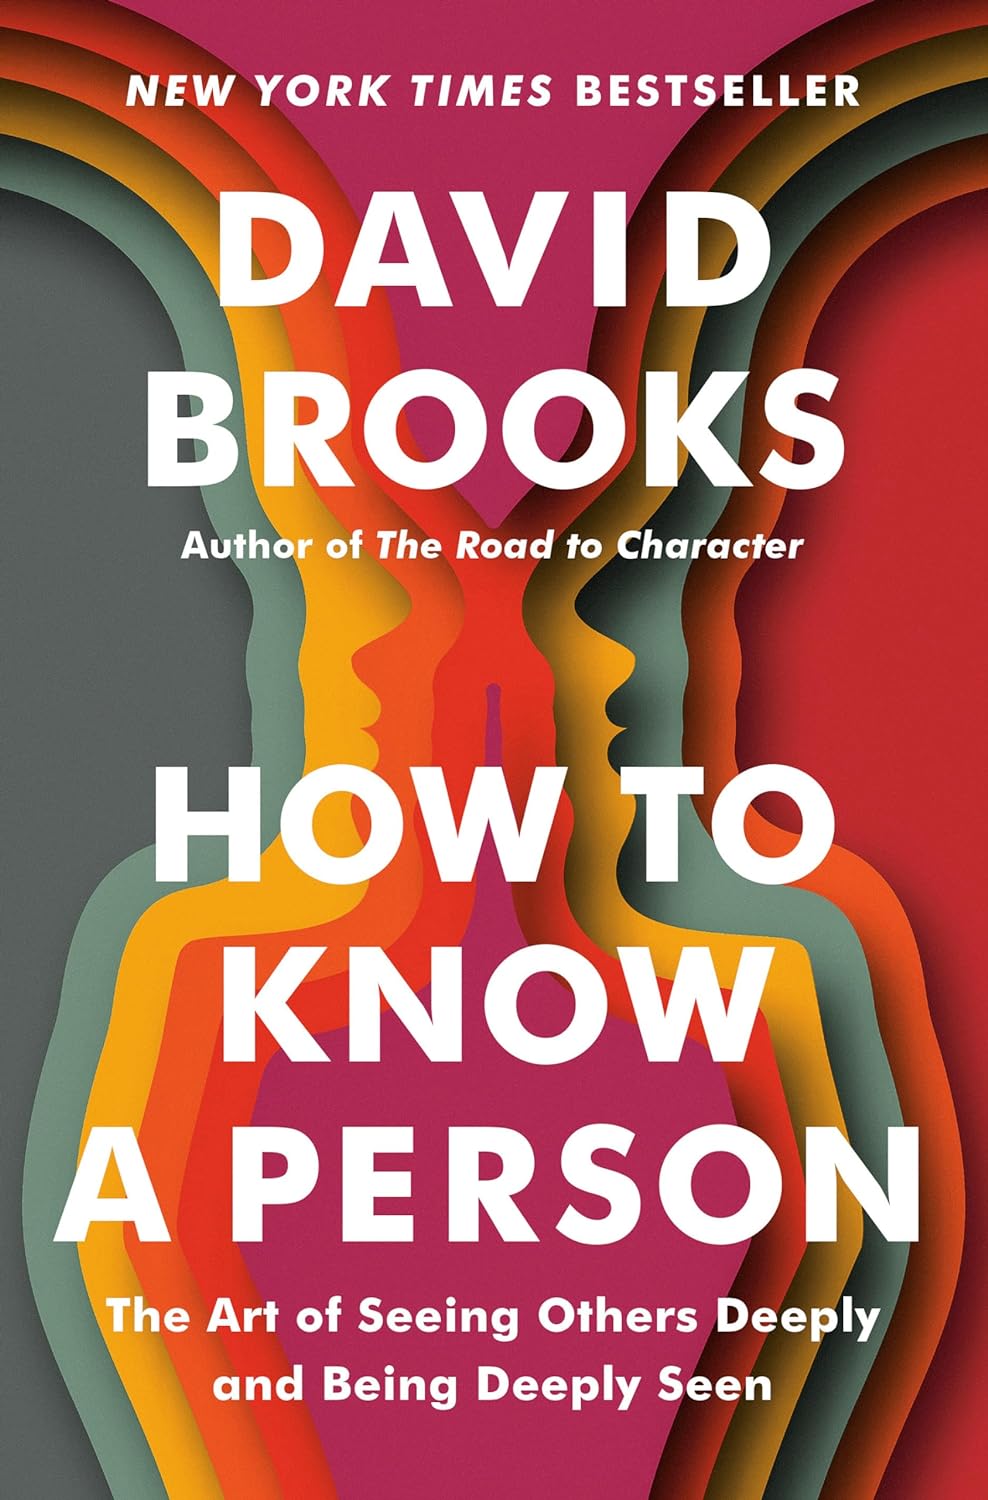 How to Know a Person: The Art of Seeing Others Deeply and Being Deeply Seen - by David Brooks (Hardcover)